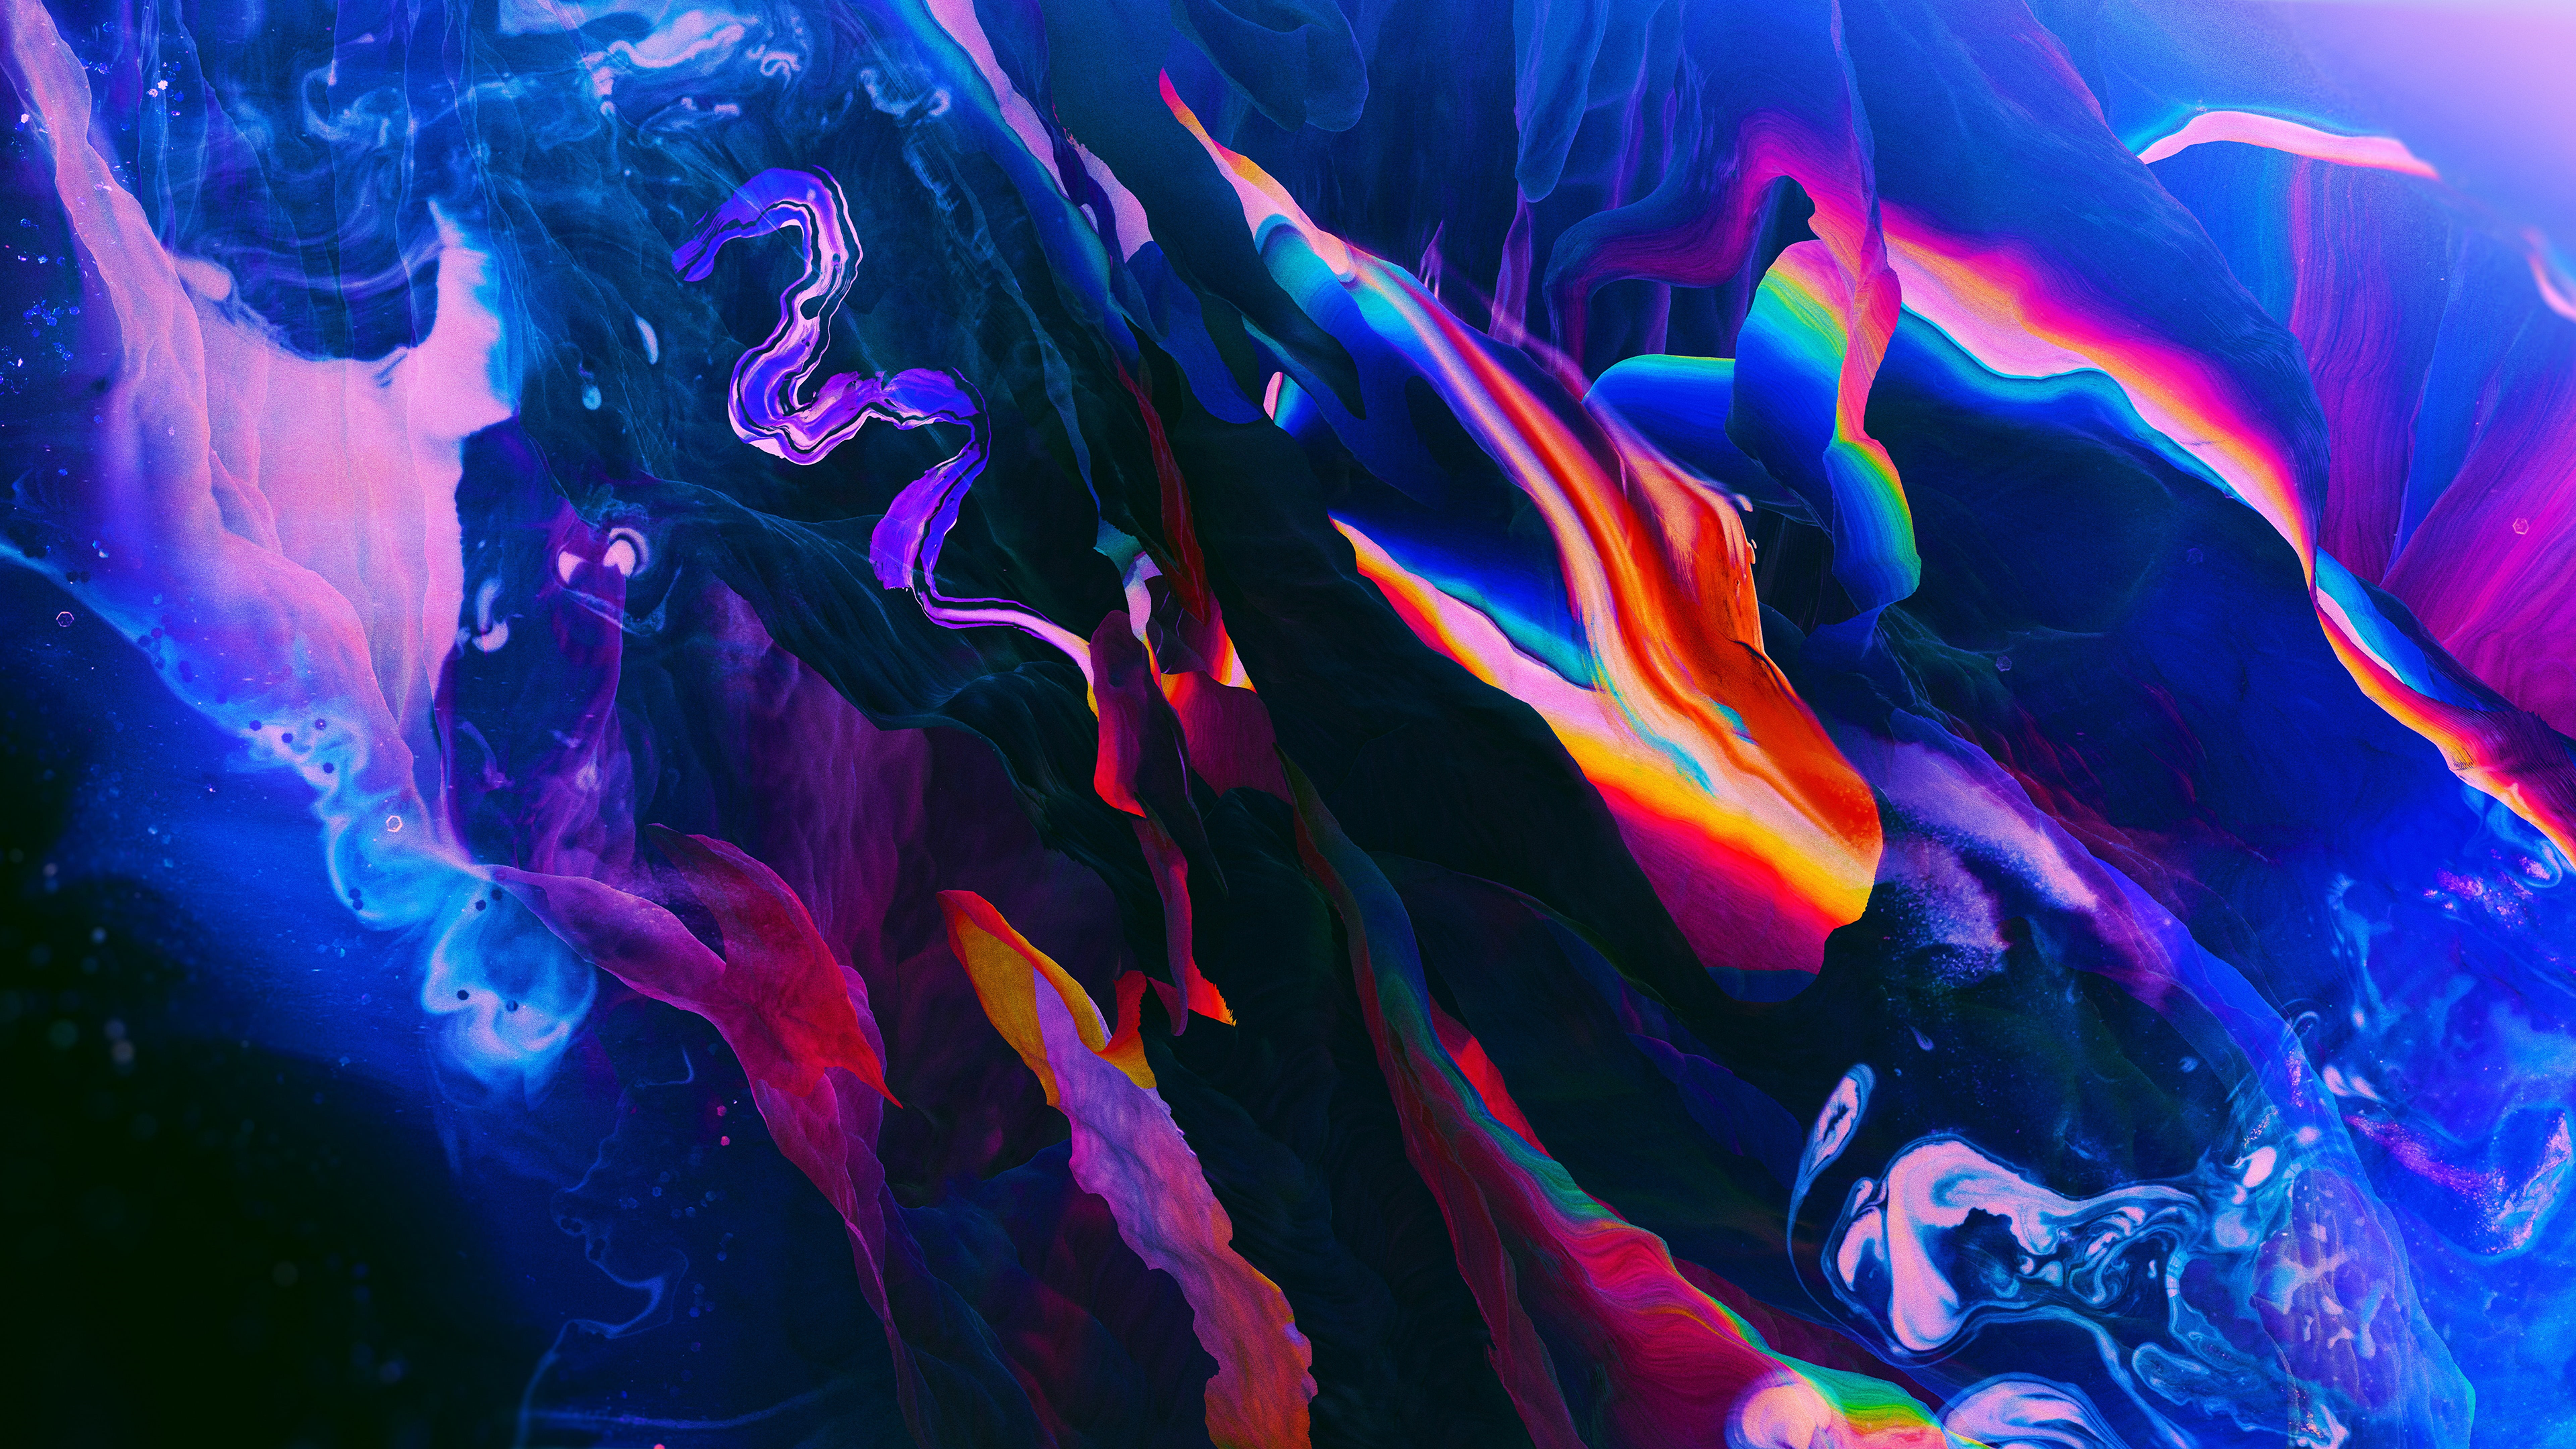 Colorful 3840x2160